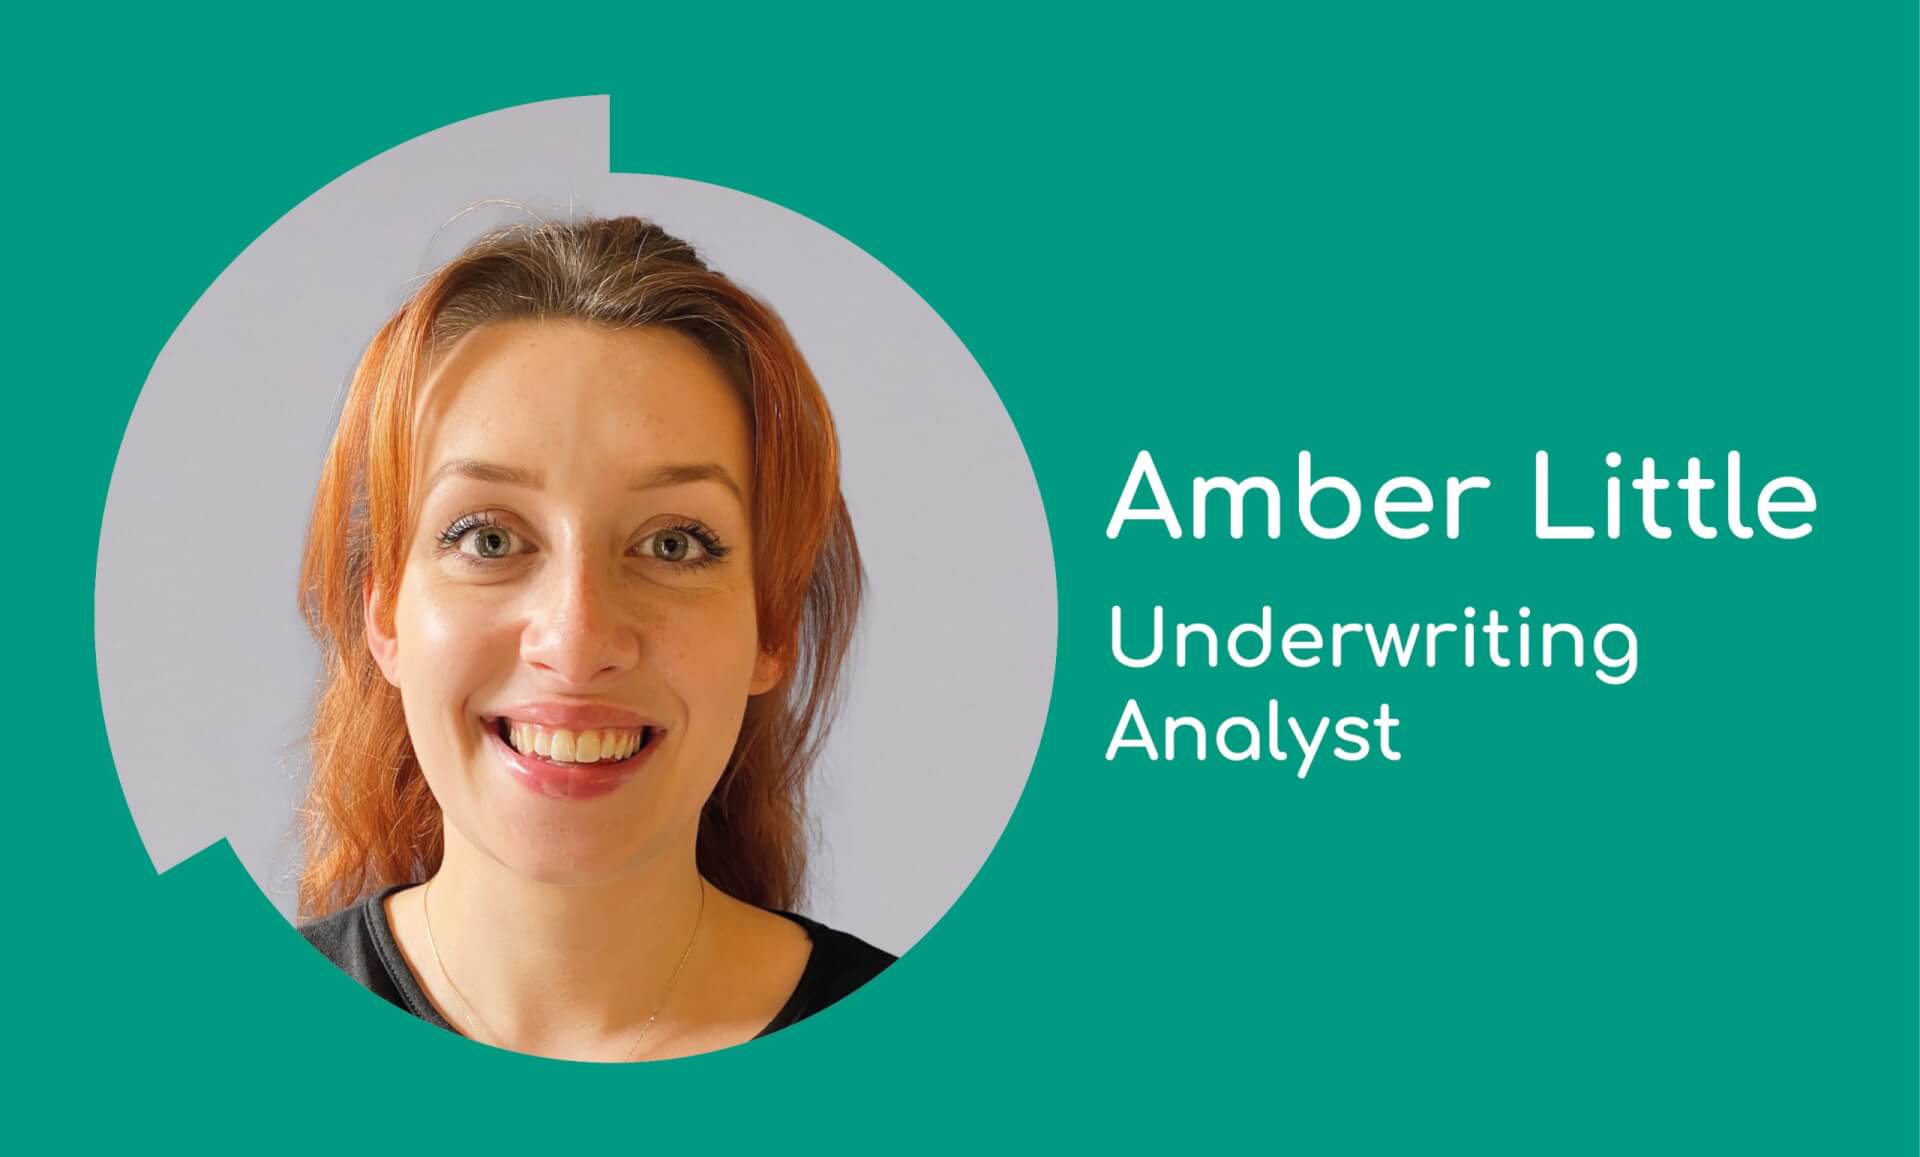 Amber joins Tower Street Finance